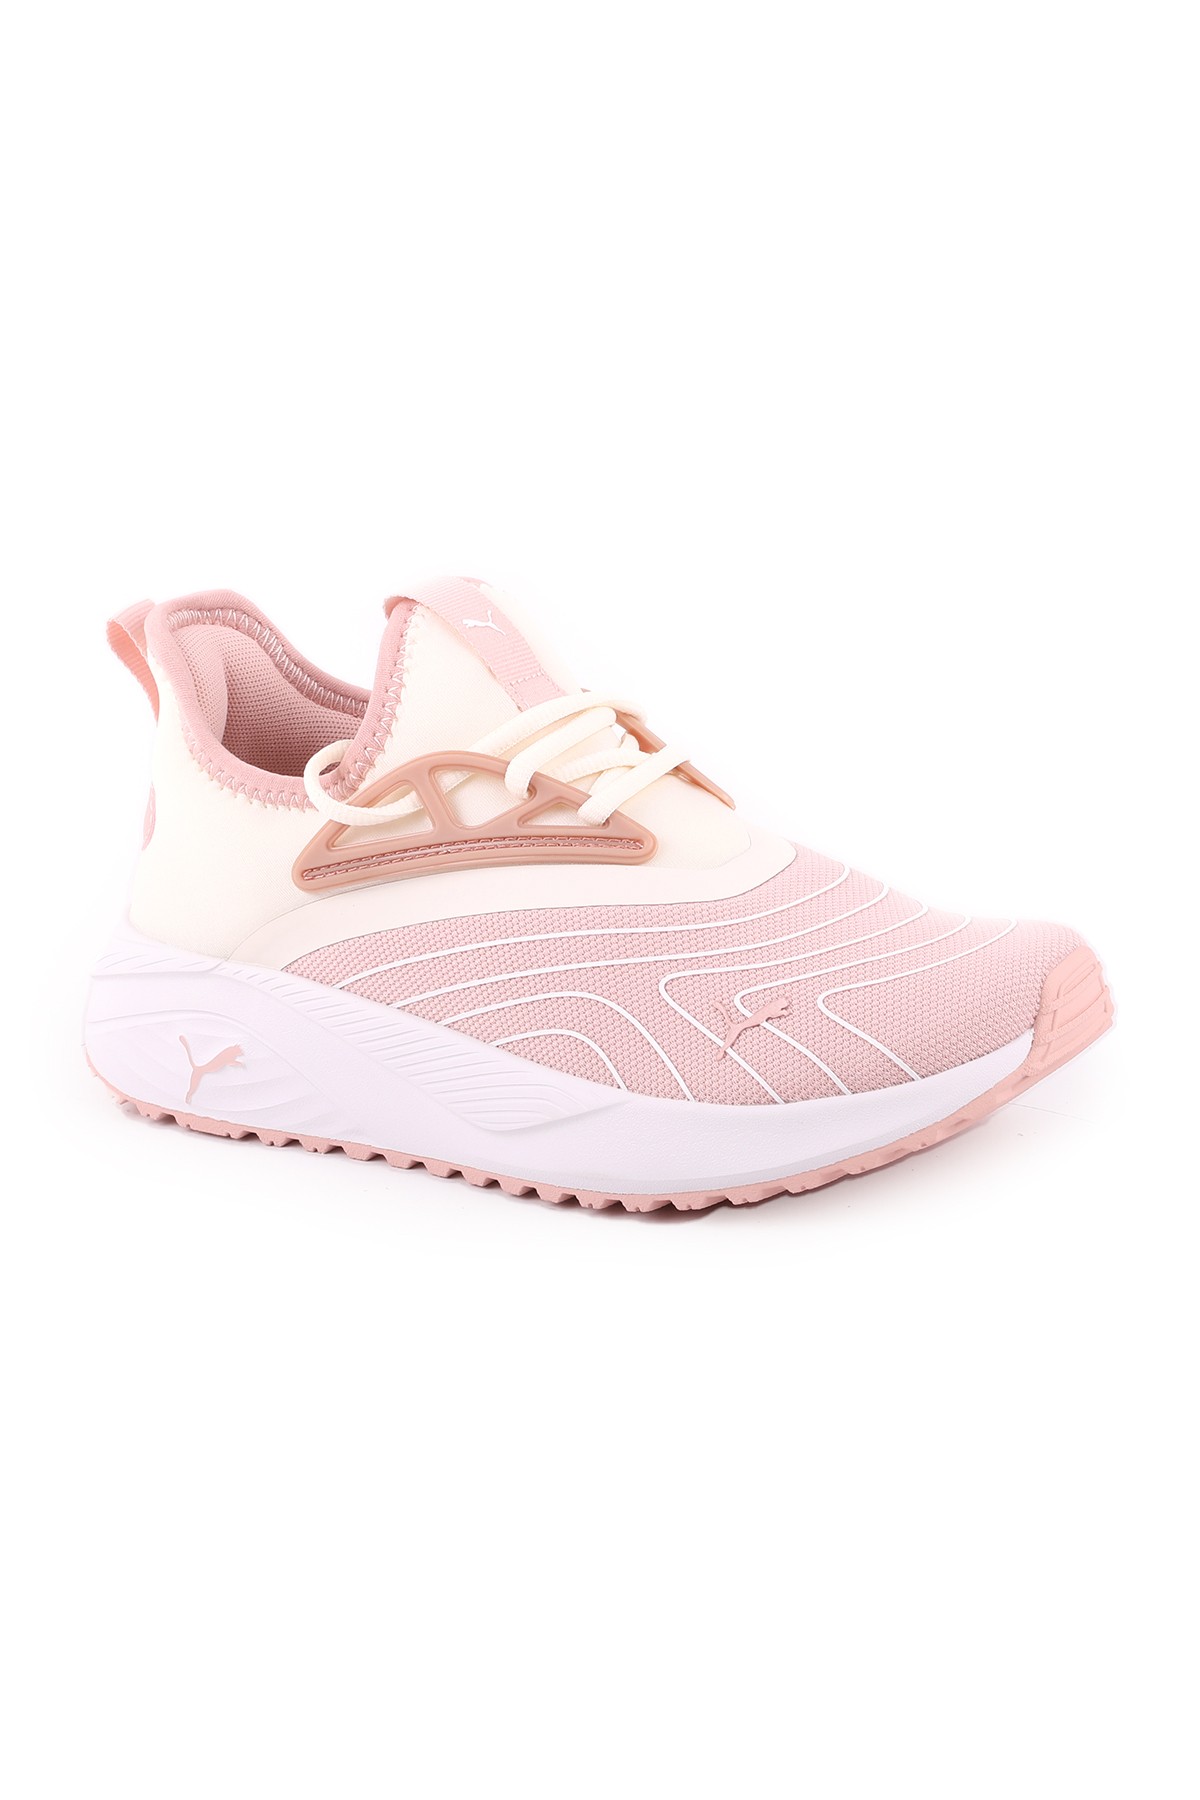 PUMA 395238 Pacer Beauty ROSE-GOLD - ROSE-GOLD